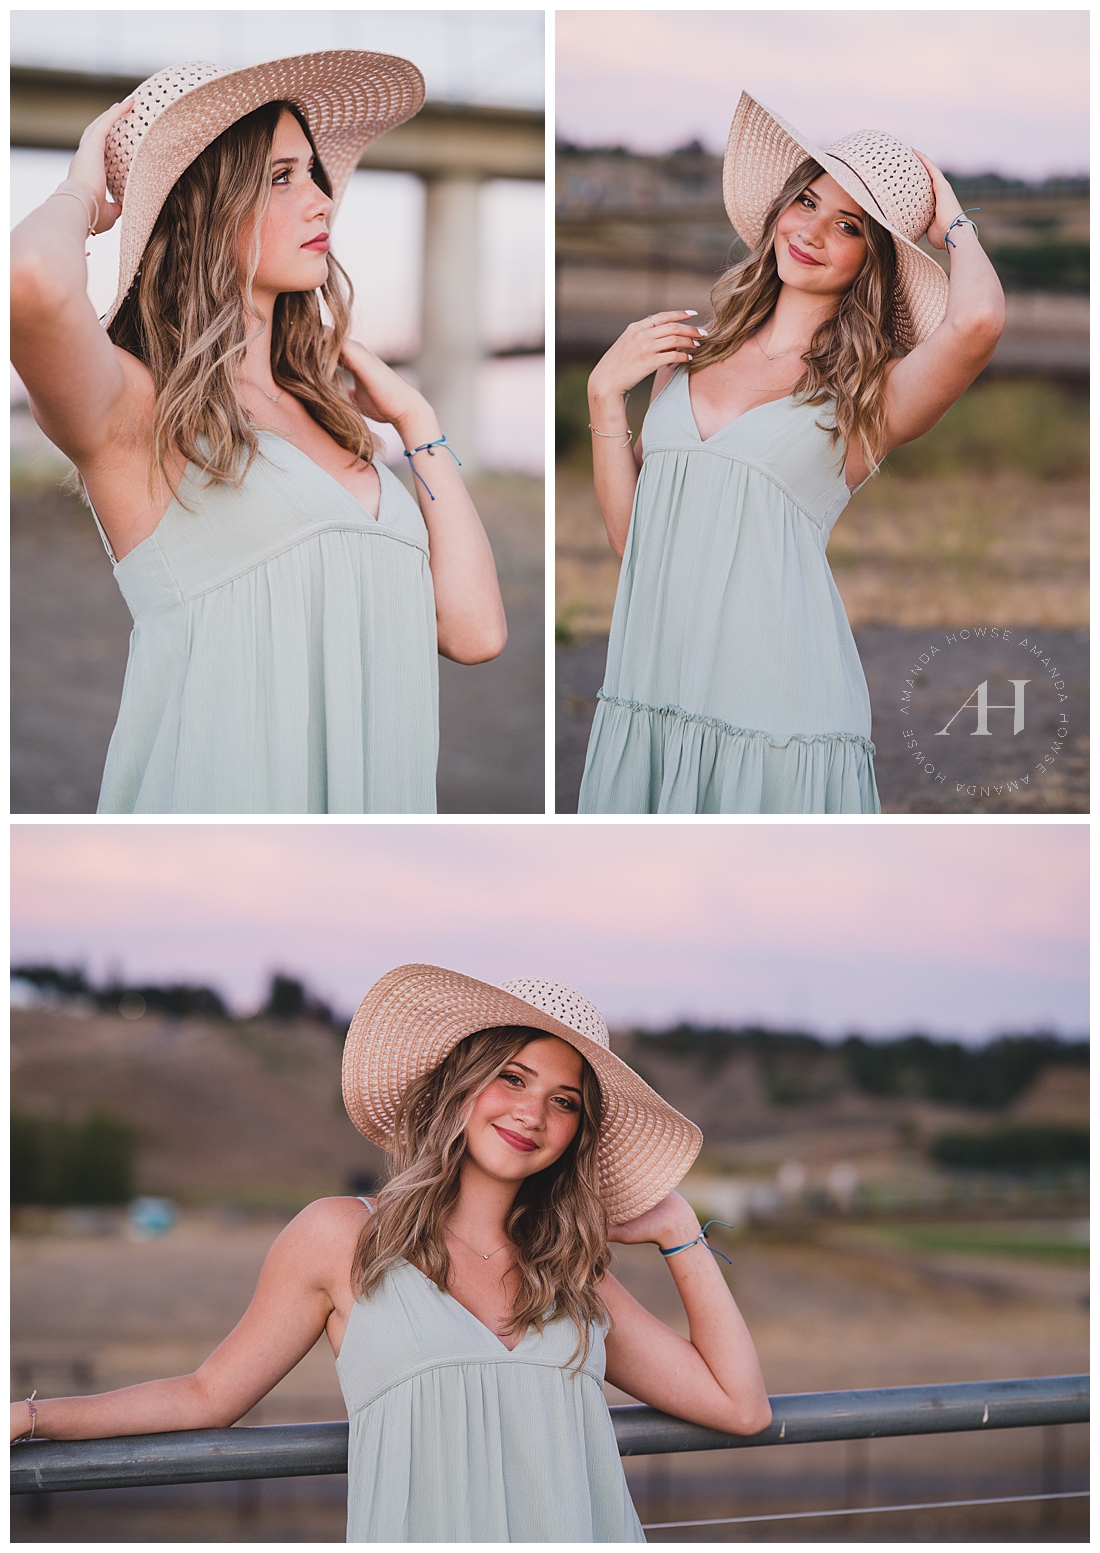 Sunset Senior Portraits in Tacoma | What to Wear for Summer Senior Portraits | Photographed by Tacoma's Best Senior Photographer Amanda Howse Photography